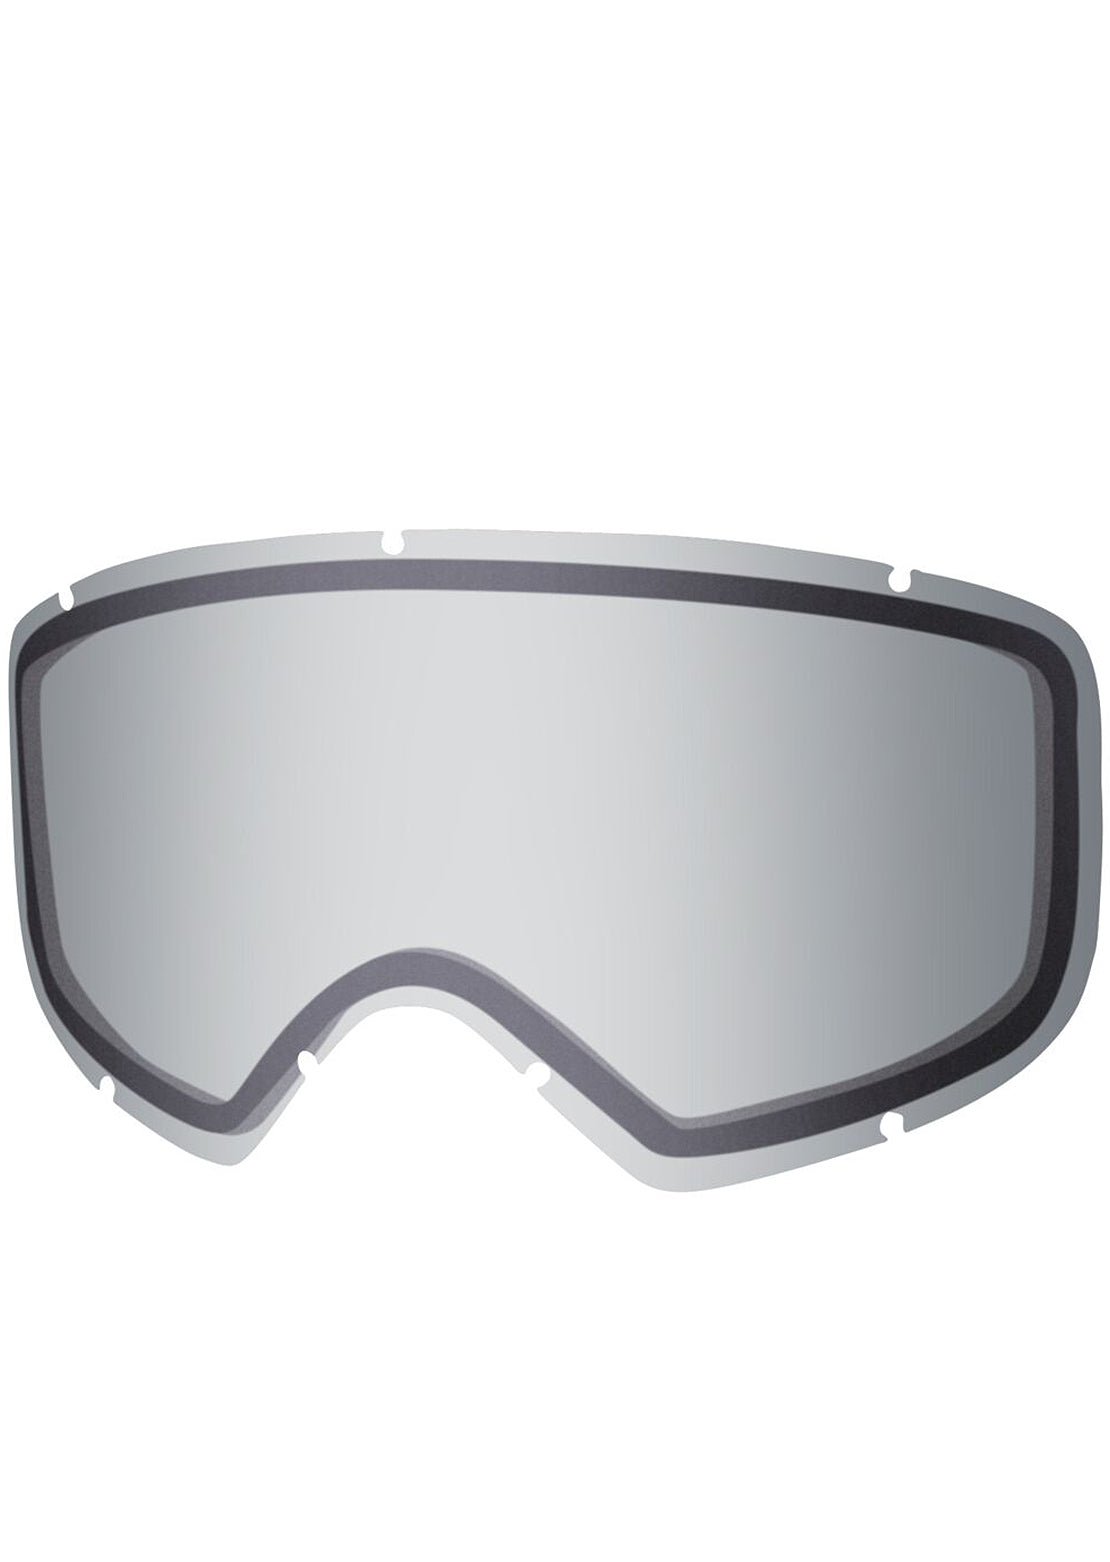 Anon Deringer Goggle Lens Clear